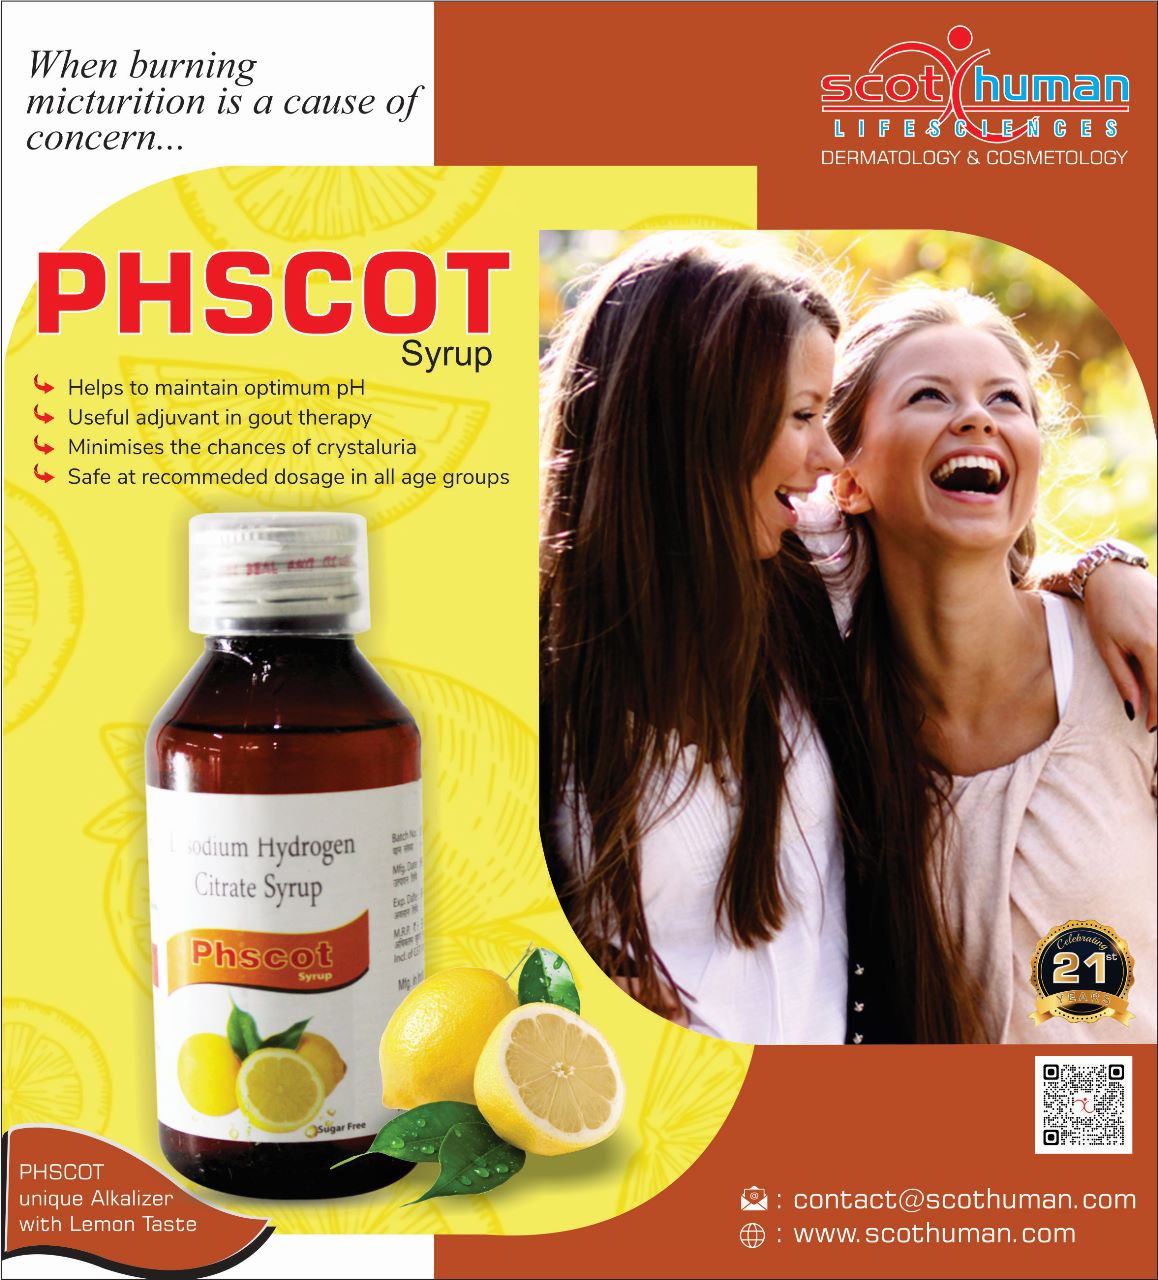 Product Name: Phscot, Compositions of Phscot are Calcium Hydrogen Citrate Syrup - Pharma Drugs and Chemicals